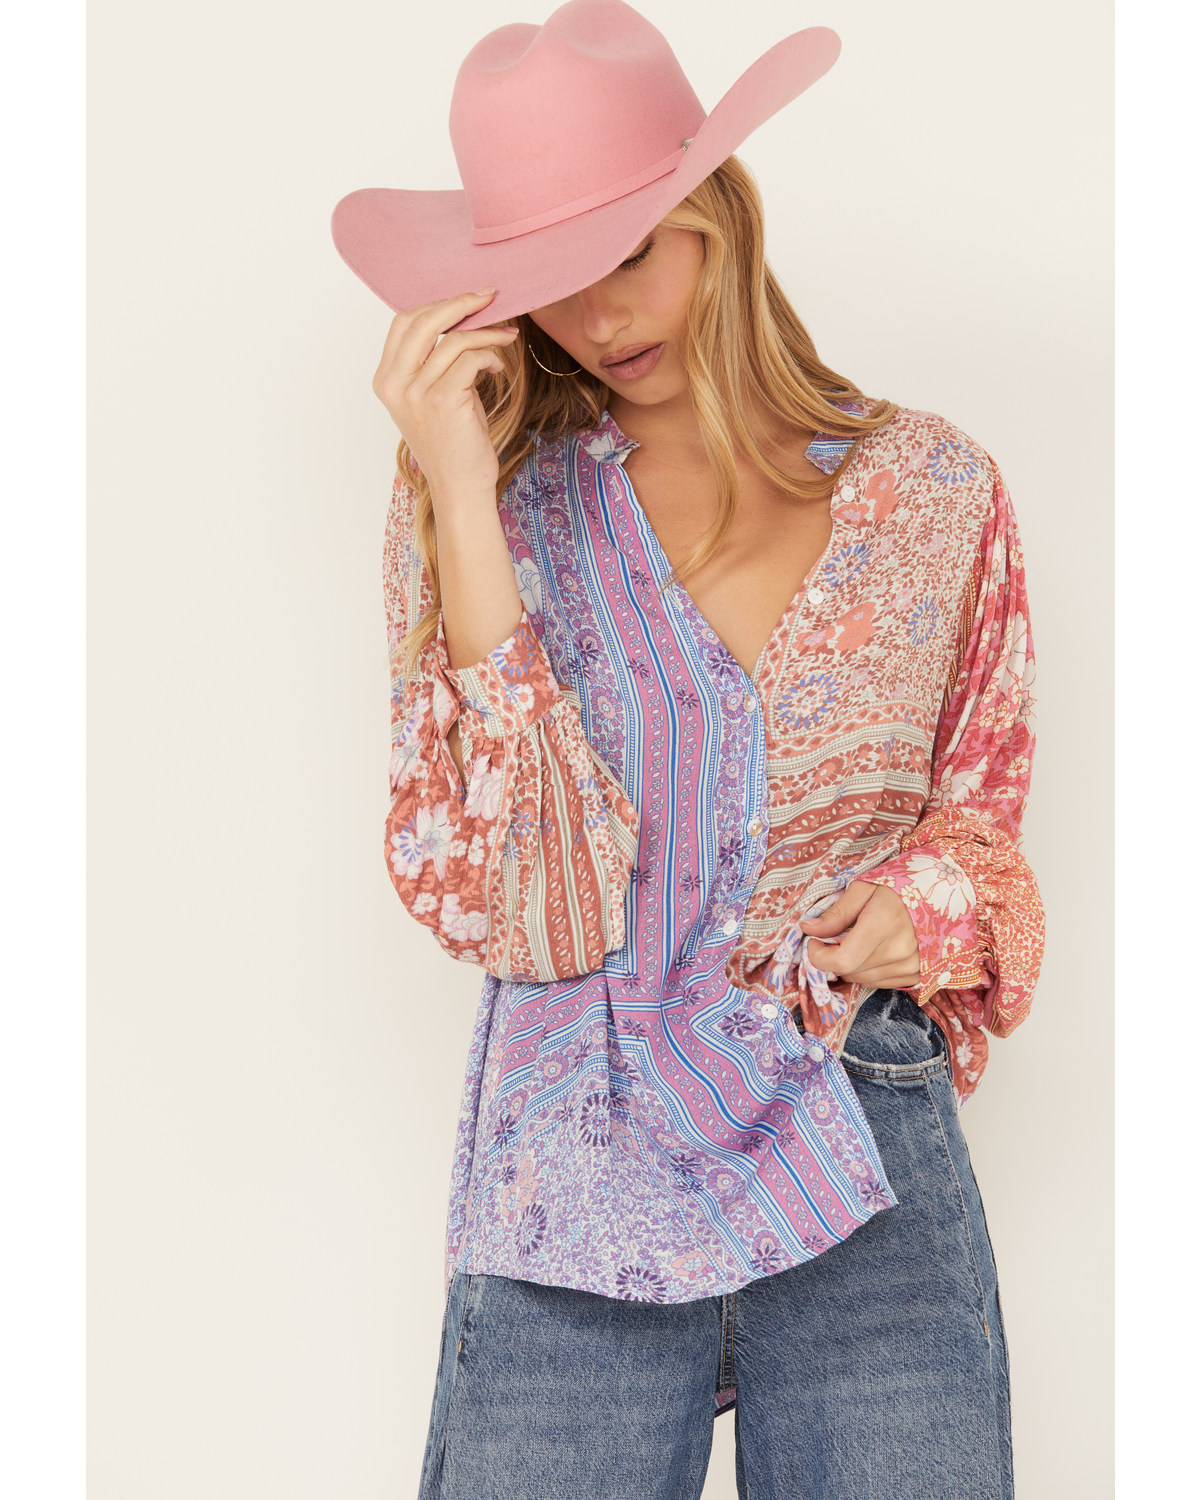 Jen's Pirate Booty Women's Fairytale Soho Patchwork Button-Down Top